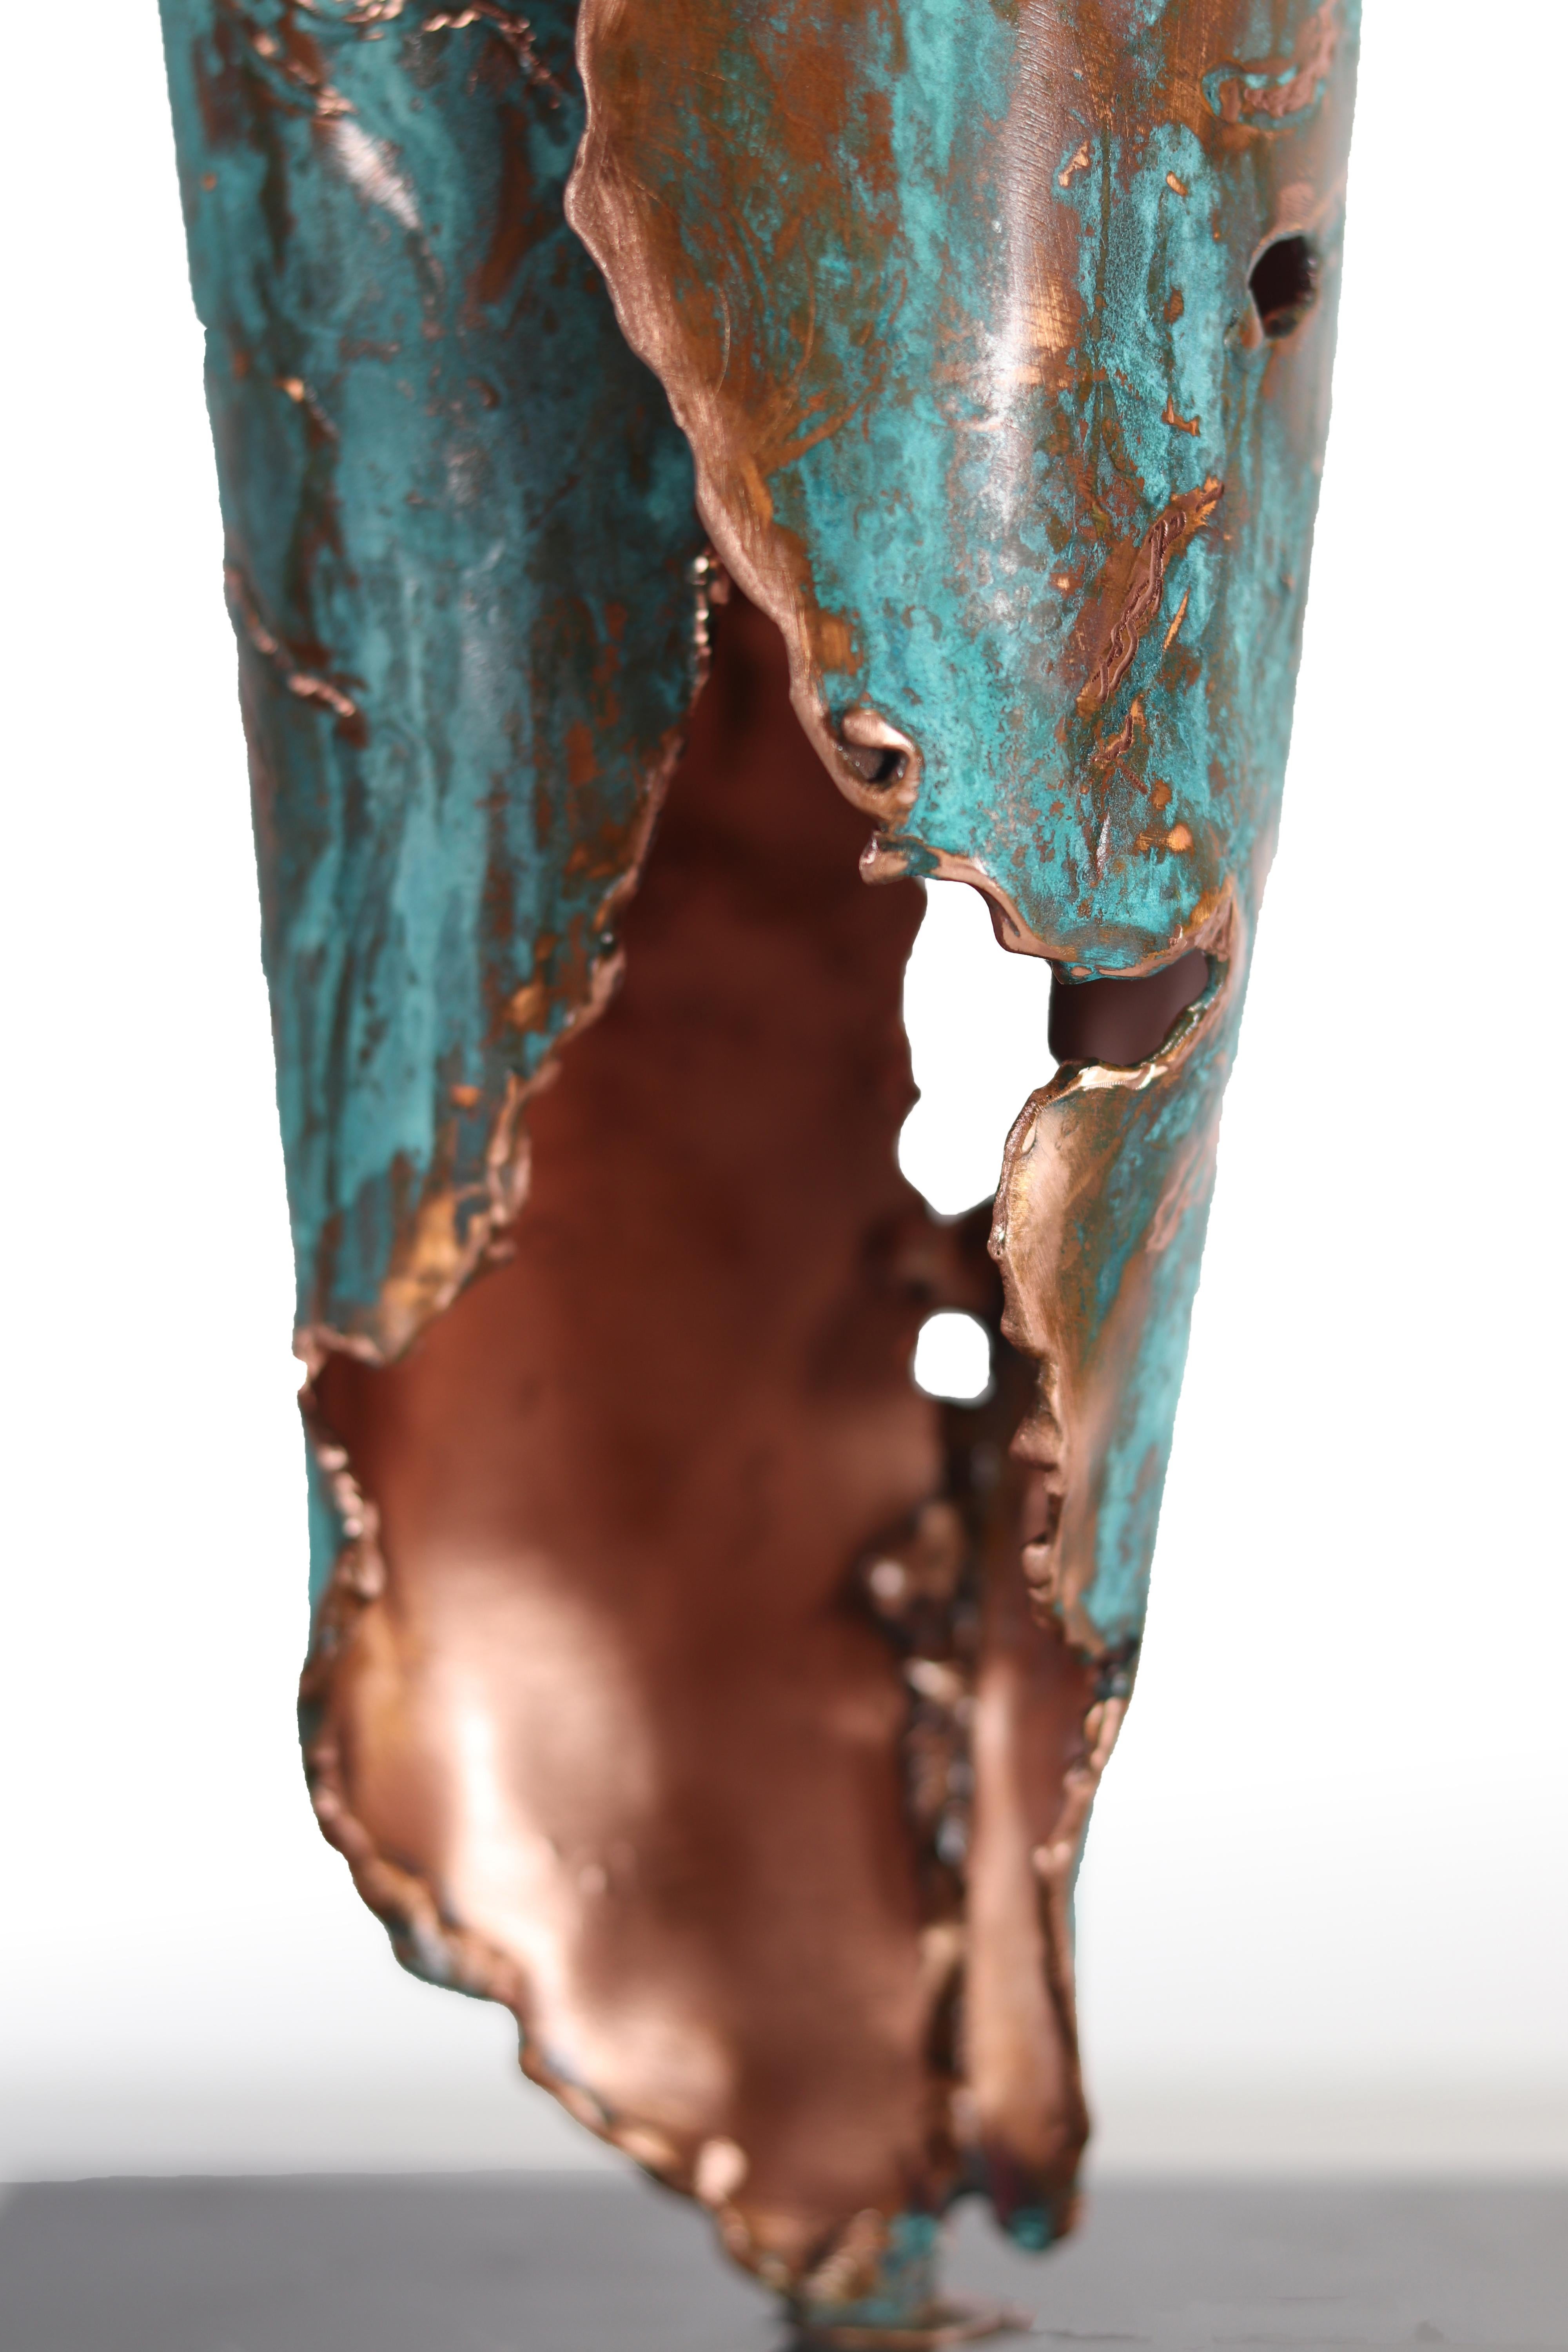 Copper hand sculpted vase by Samuel Costantini
Entirely handmade by the artist
Edition 9 + 1 AP
Measures: diameter 140mm, height 400 mm.
Diameter 5.51 inches height 15.748 inches

A small shoot begins to see the light under a carpet of
fallen